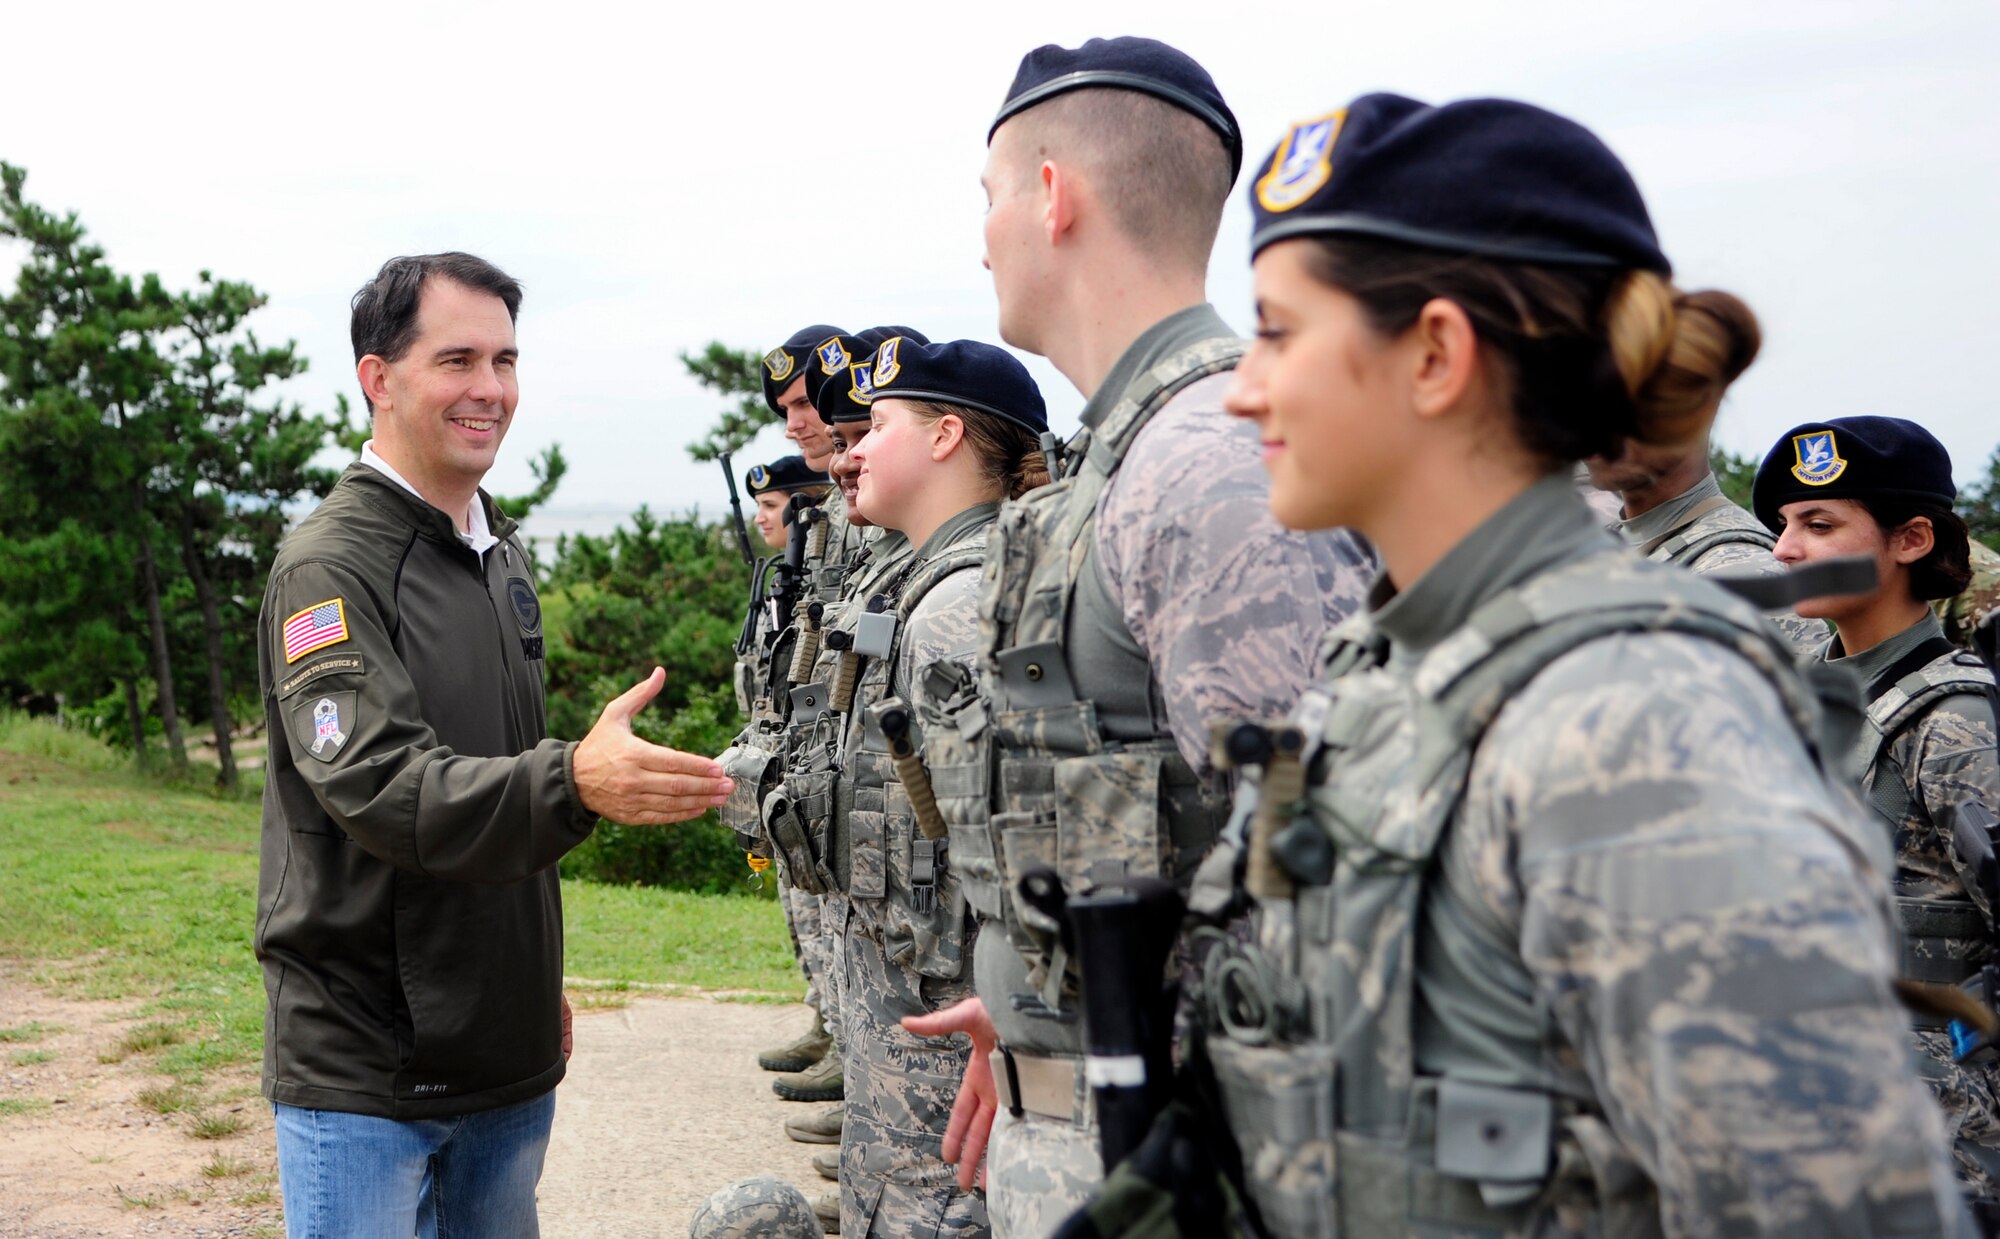 The Honorable Scott Walker, Governor of Wisconsin, greets Airmen from the 8th Security Forces Squadron, at Kunsan Air Base, Republic of Korea, Sept. 16, 2017. Walker visited Wisconsin Air National Guard 115th Fighter Wing Airmen deployed as part of a Theater Security Package and gained a greater understanding of the Wolf Pack’s mission. (U.S. Air Force photo by Senior Airman Colby L. Hardin)